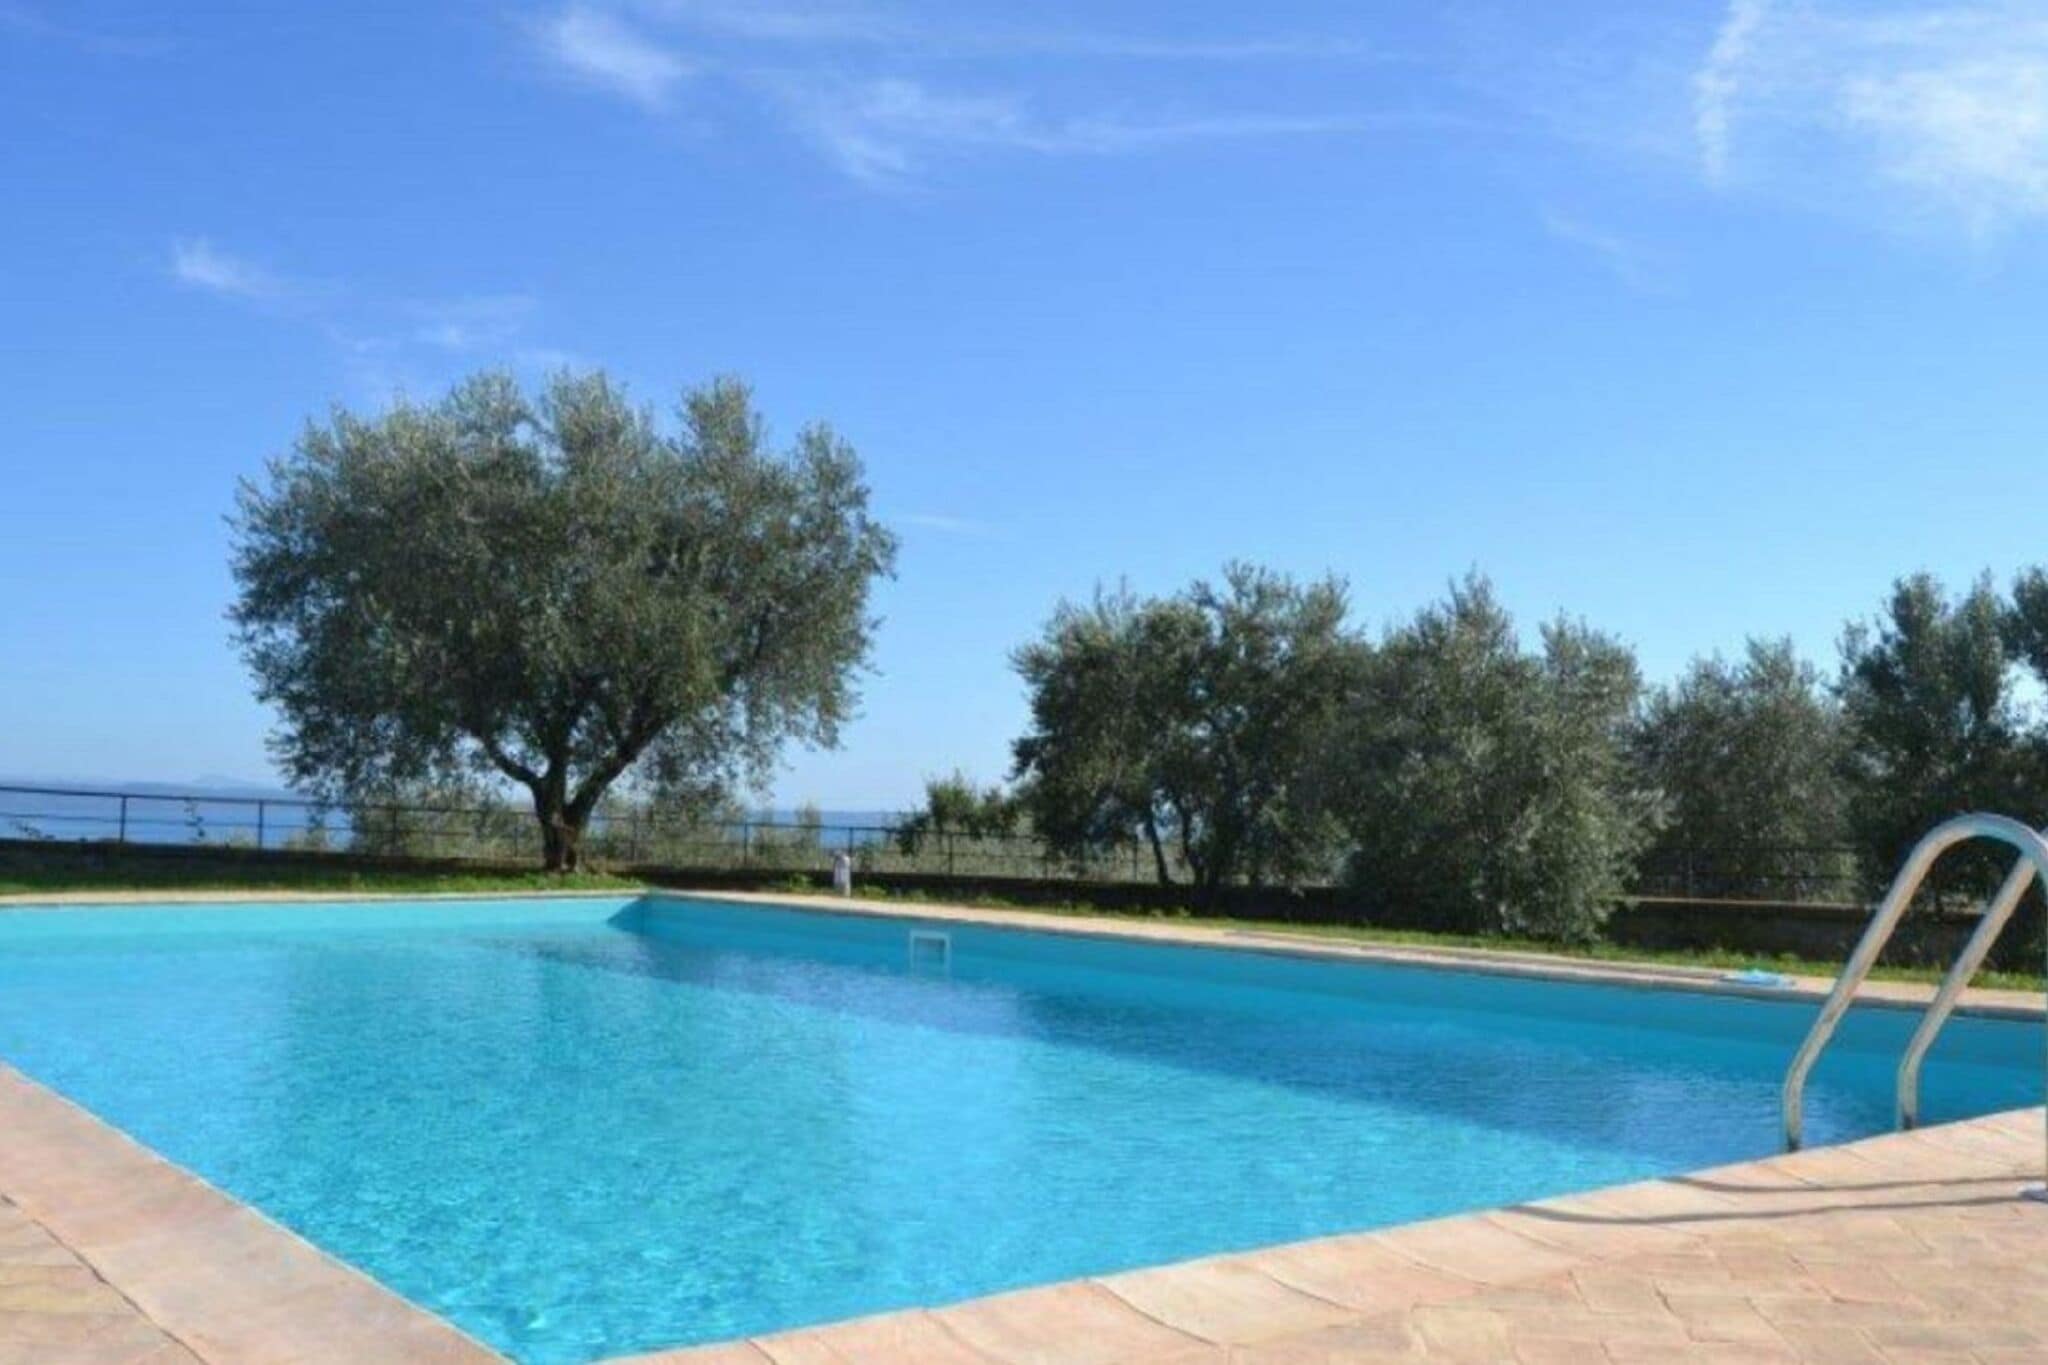 Appealing Holiday Home in Grotte di Castro with Heated Pool